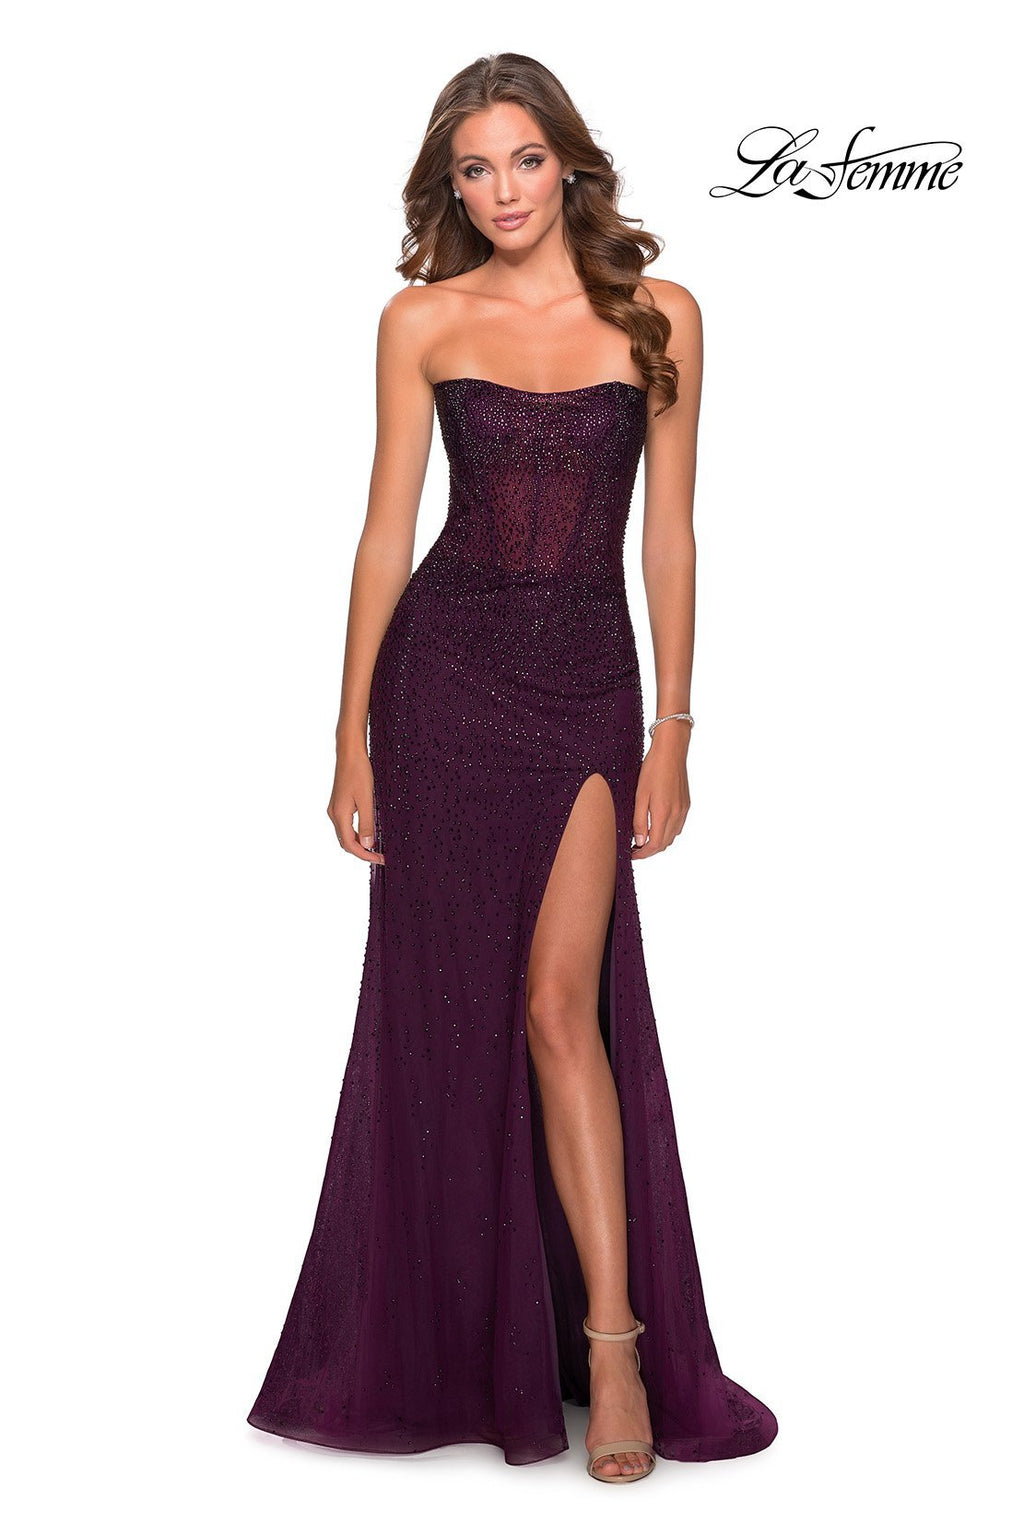 La Femme 28621 dress images in these colors: Dark Berry, Emerald, Navy.